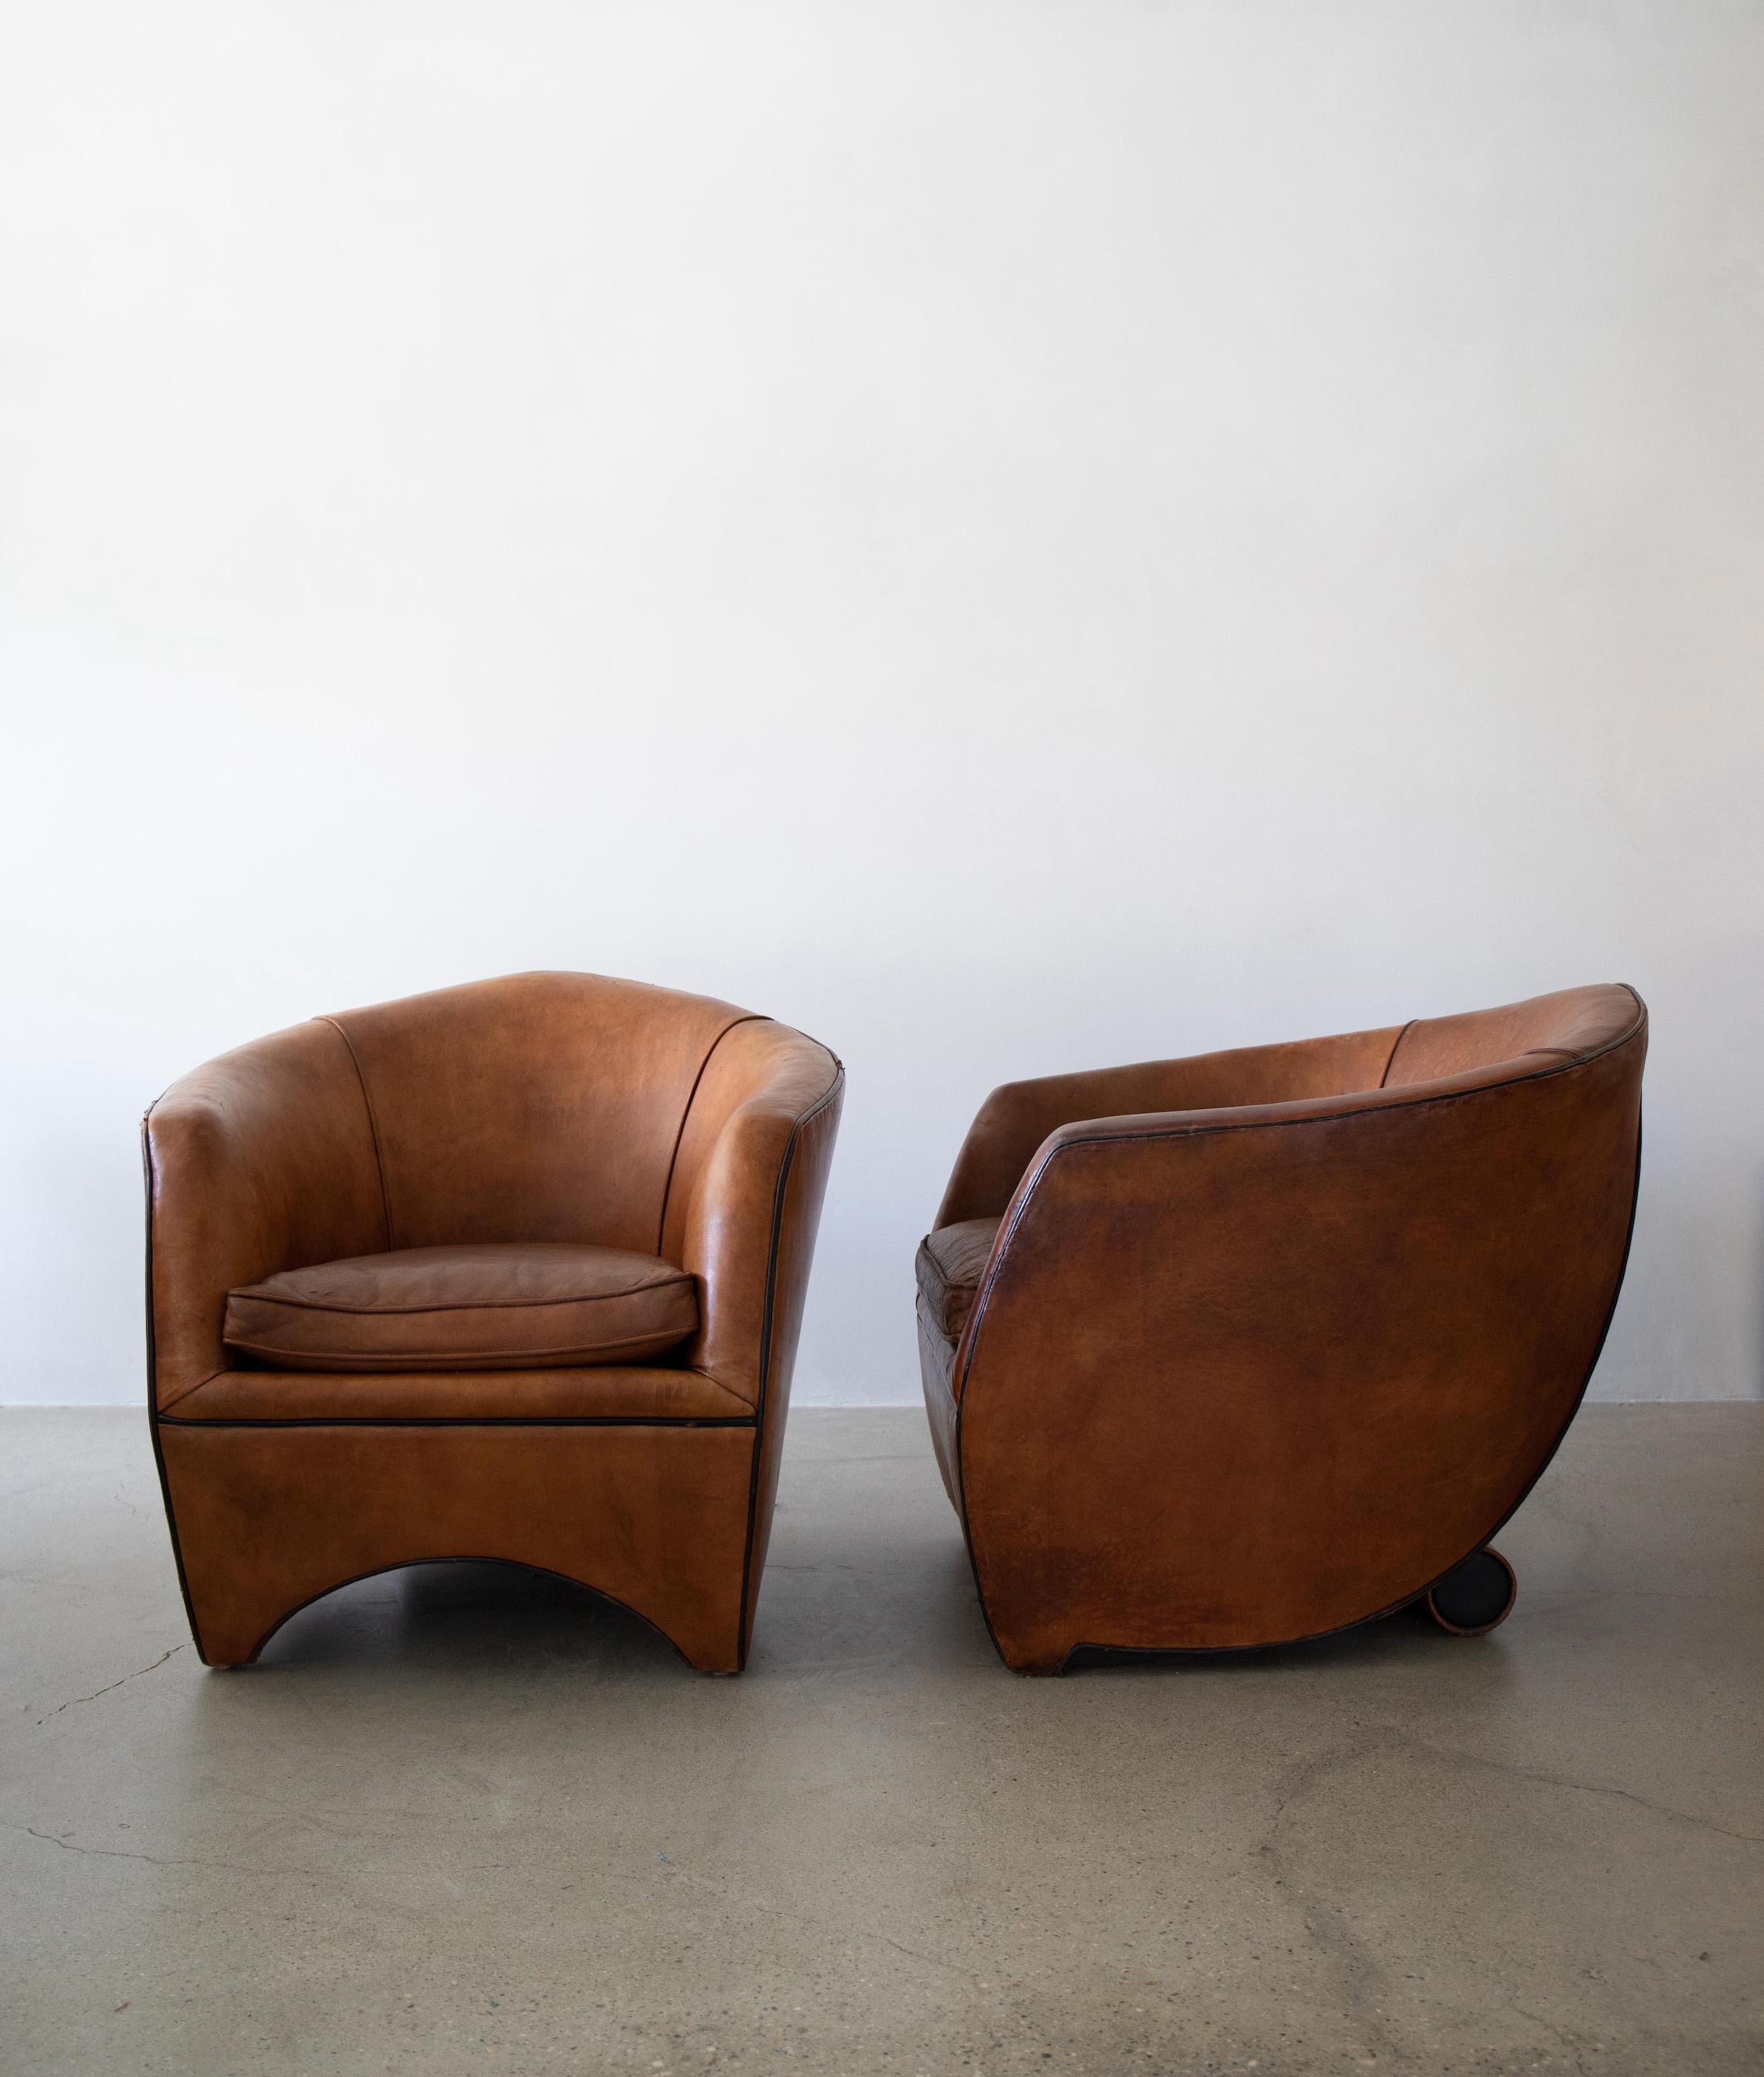 Truly extraordinary sheepskin leather armchairs that have soft curves and unique concave and convex shapes by Dutch designer Bart van Bekhoven.

The back of the chair features a triangular contrast piping pattern and rounded leather back-leg